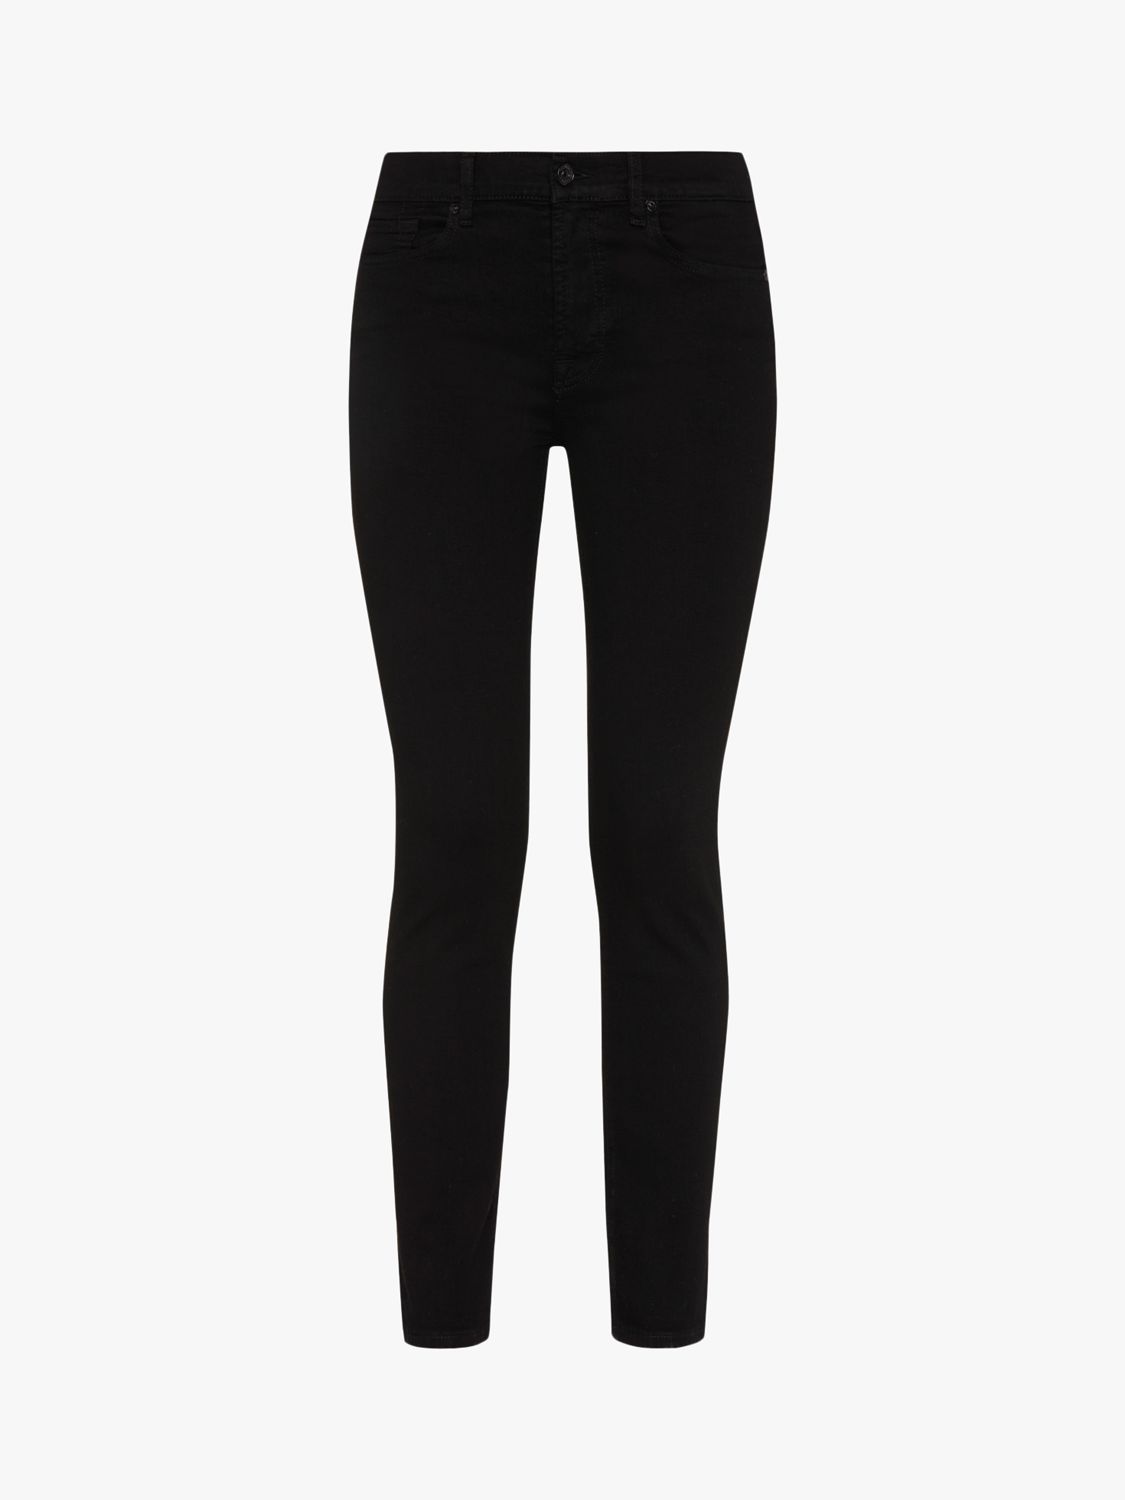 7 For All Mankind Roxanne B(Air) Jeans, Rinsed Black, 24